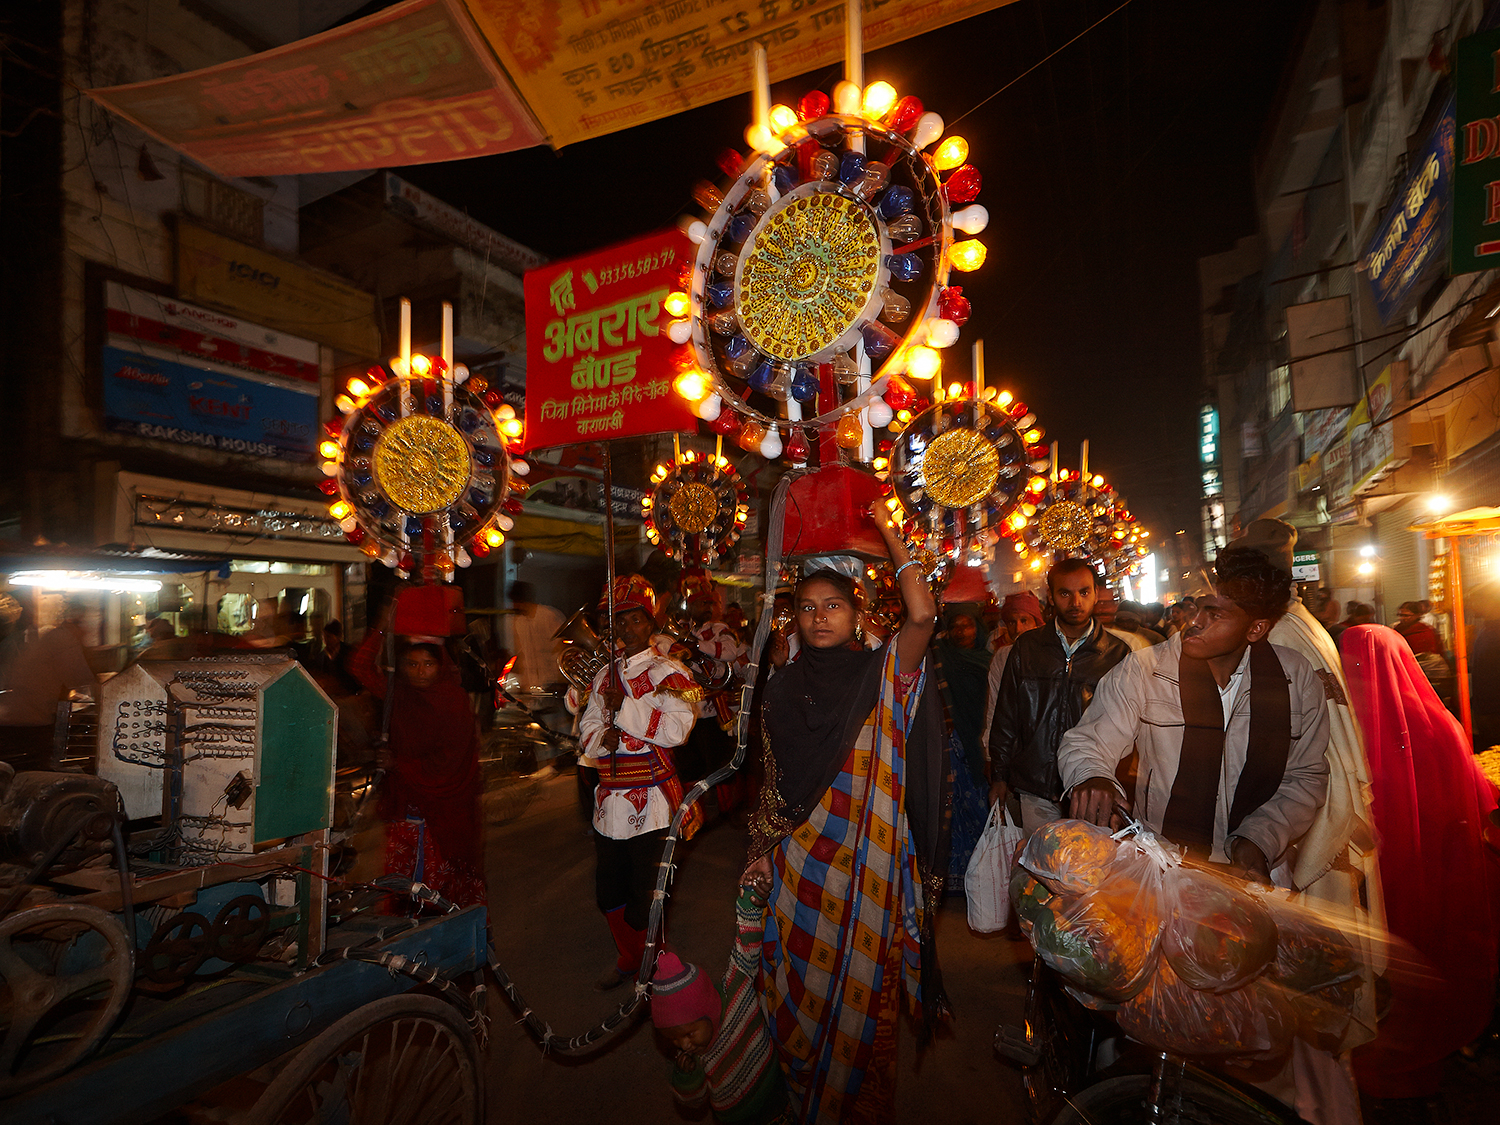 The Light-Bearers walking a marriage procession. On of the bearers has a toddler who she had to bring along with her